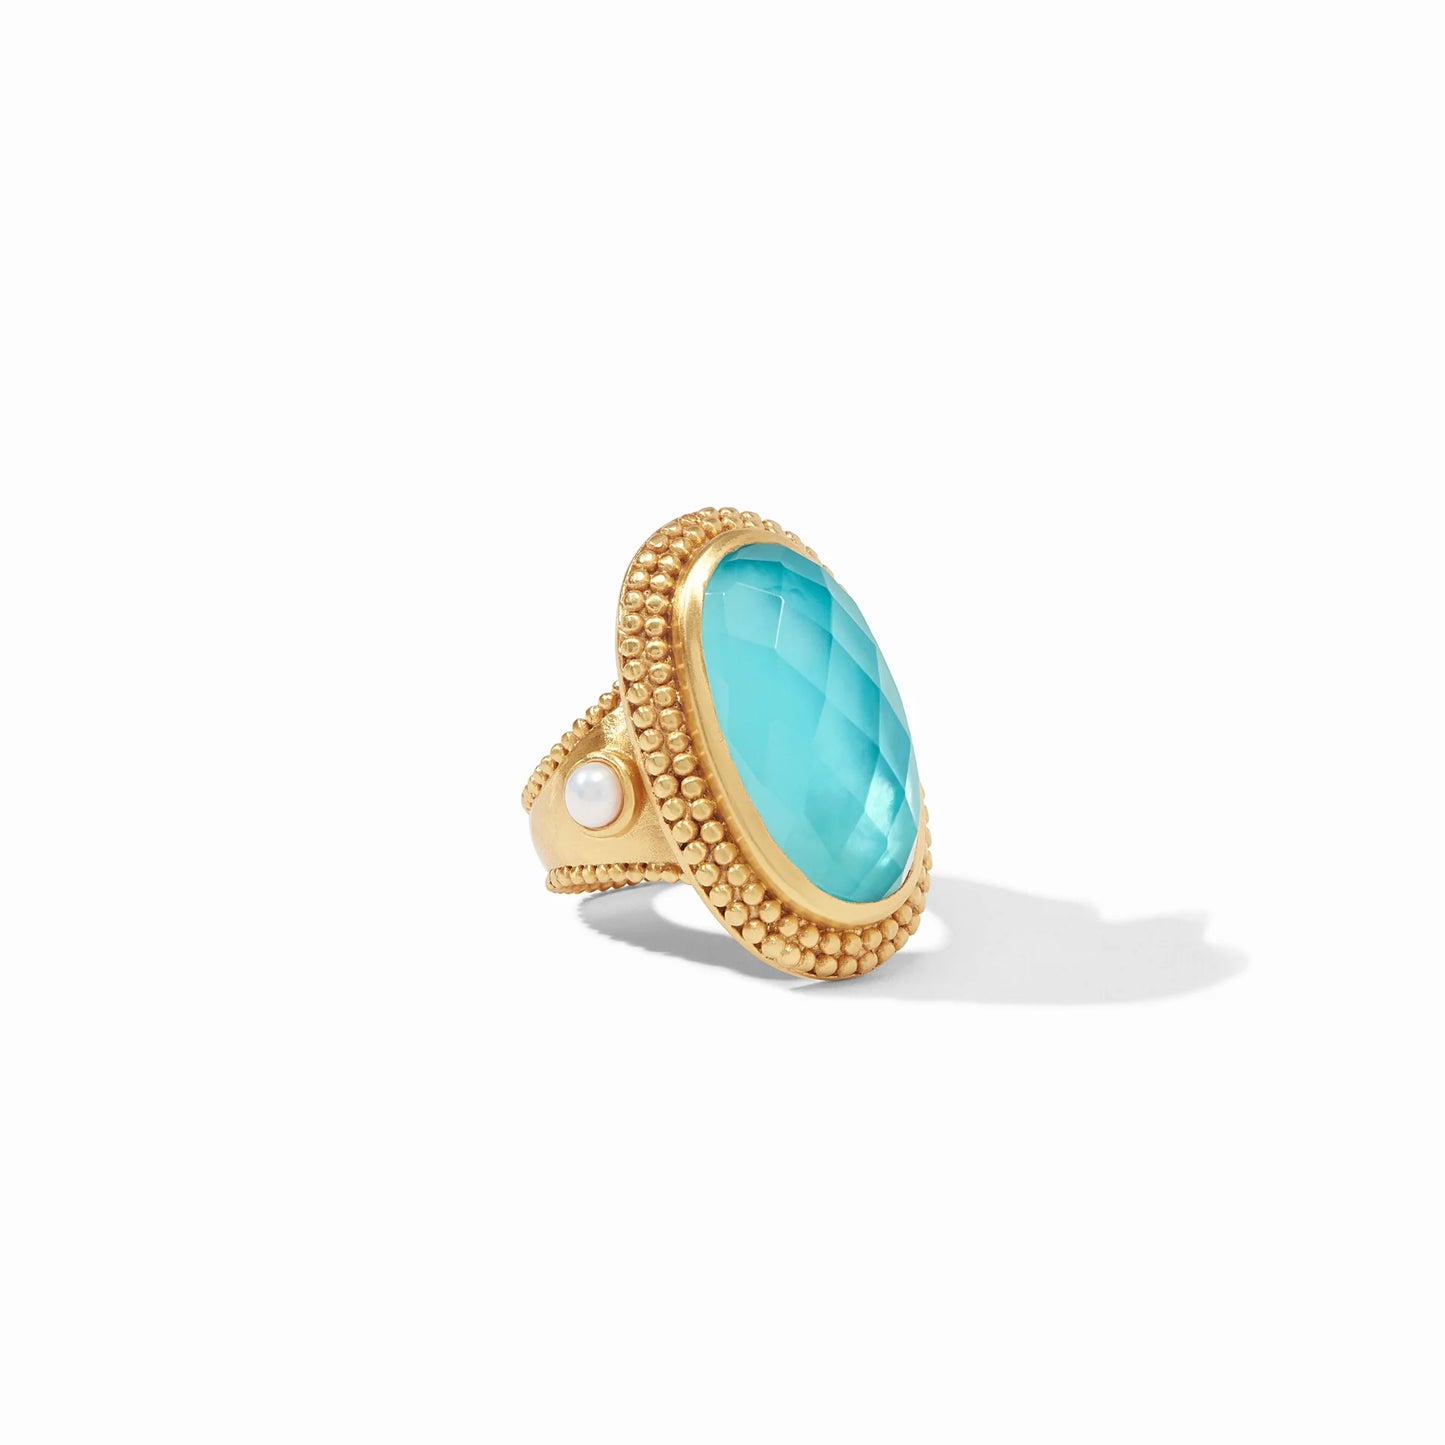 Flora Statement Ring Bahamian Blue 7 by Julie Vos. 24K gold plate, glass doublet, freshwater pearl cabochons 1.25 inch length. Shop at The Painted Cottage in Edgewater, MD.